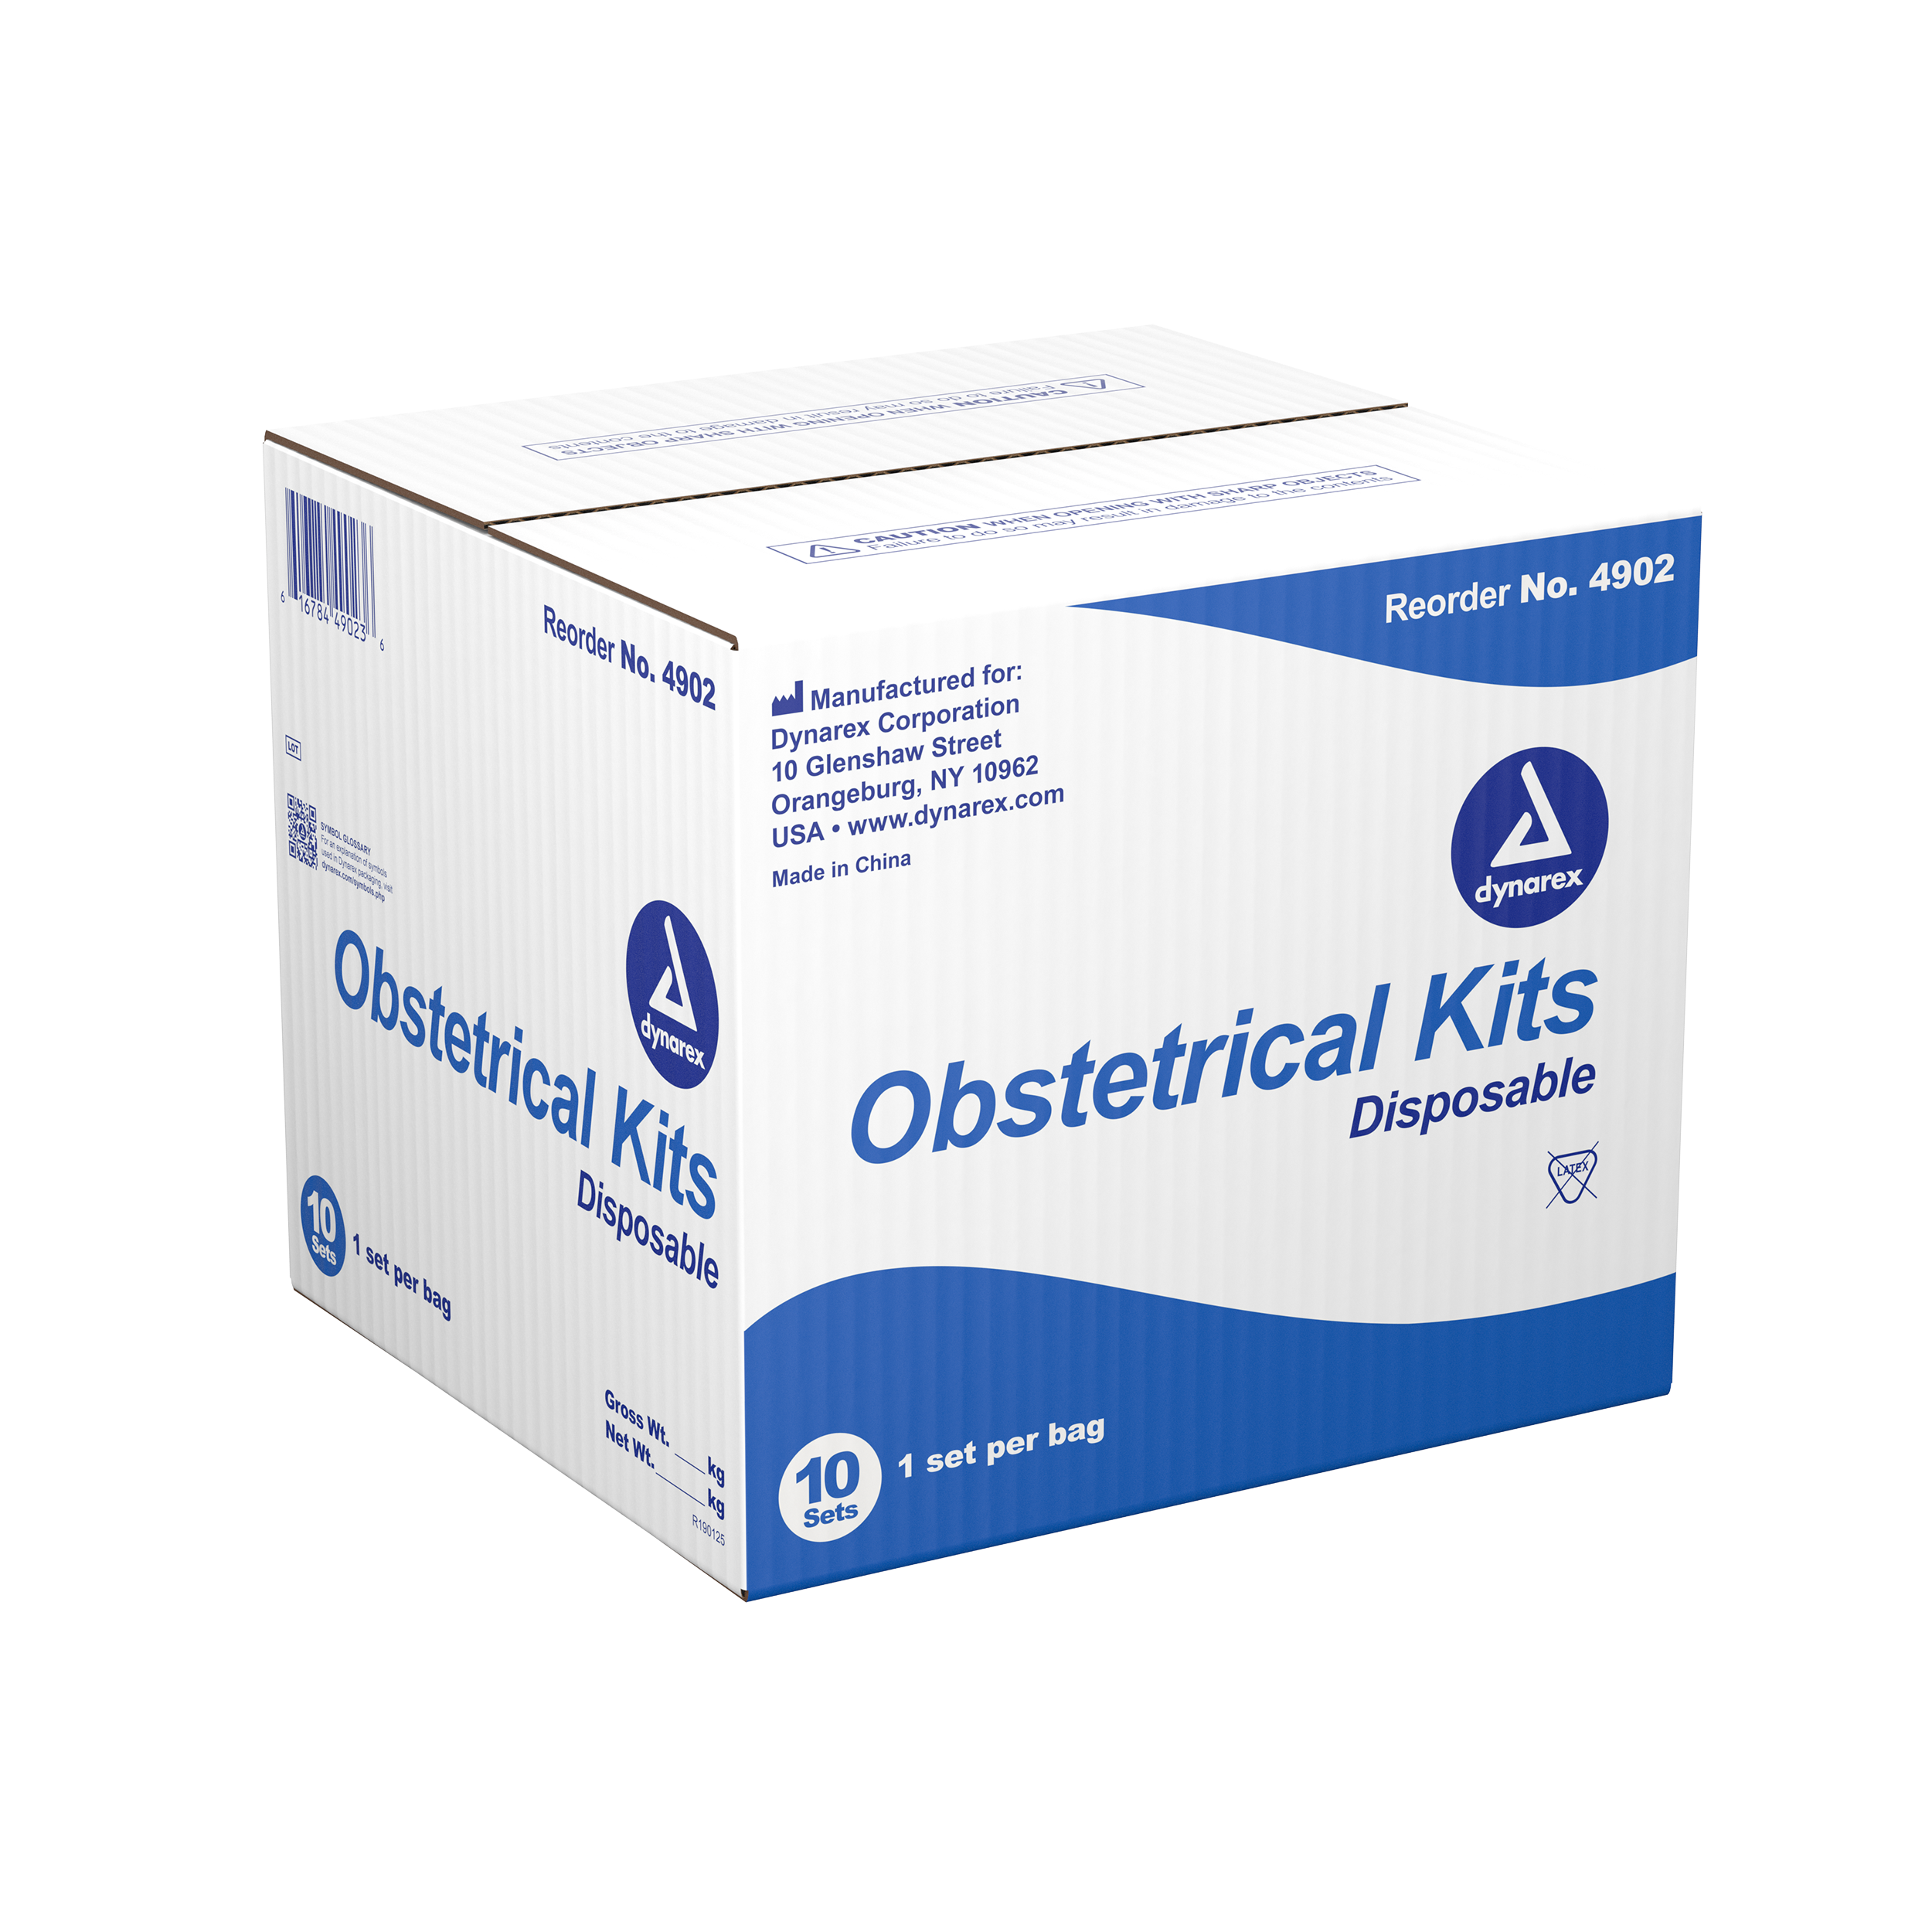 Obstetrical Kit - Bagged - 10 kits